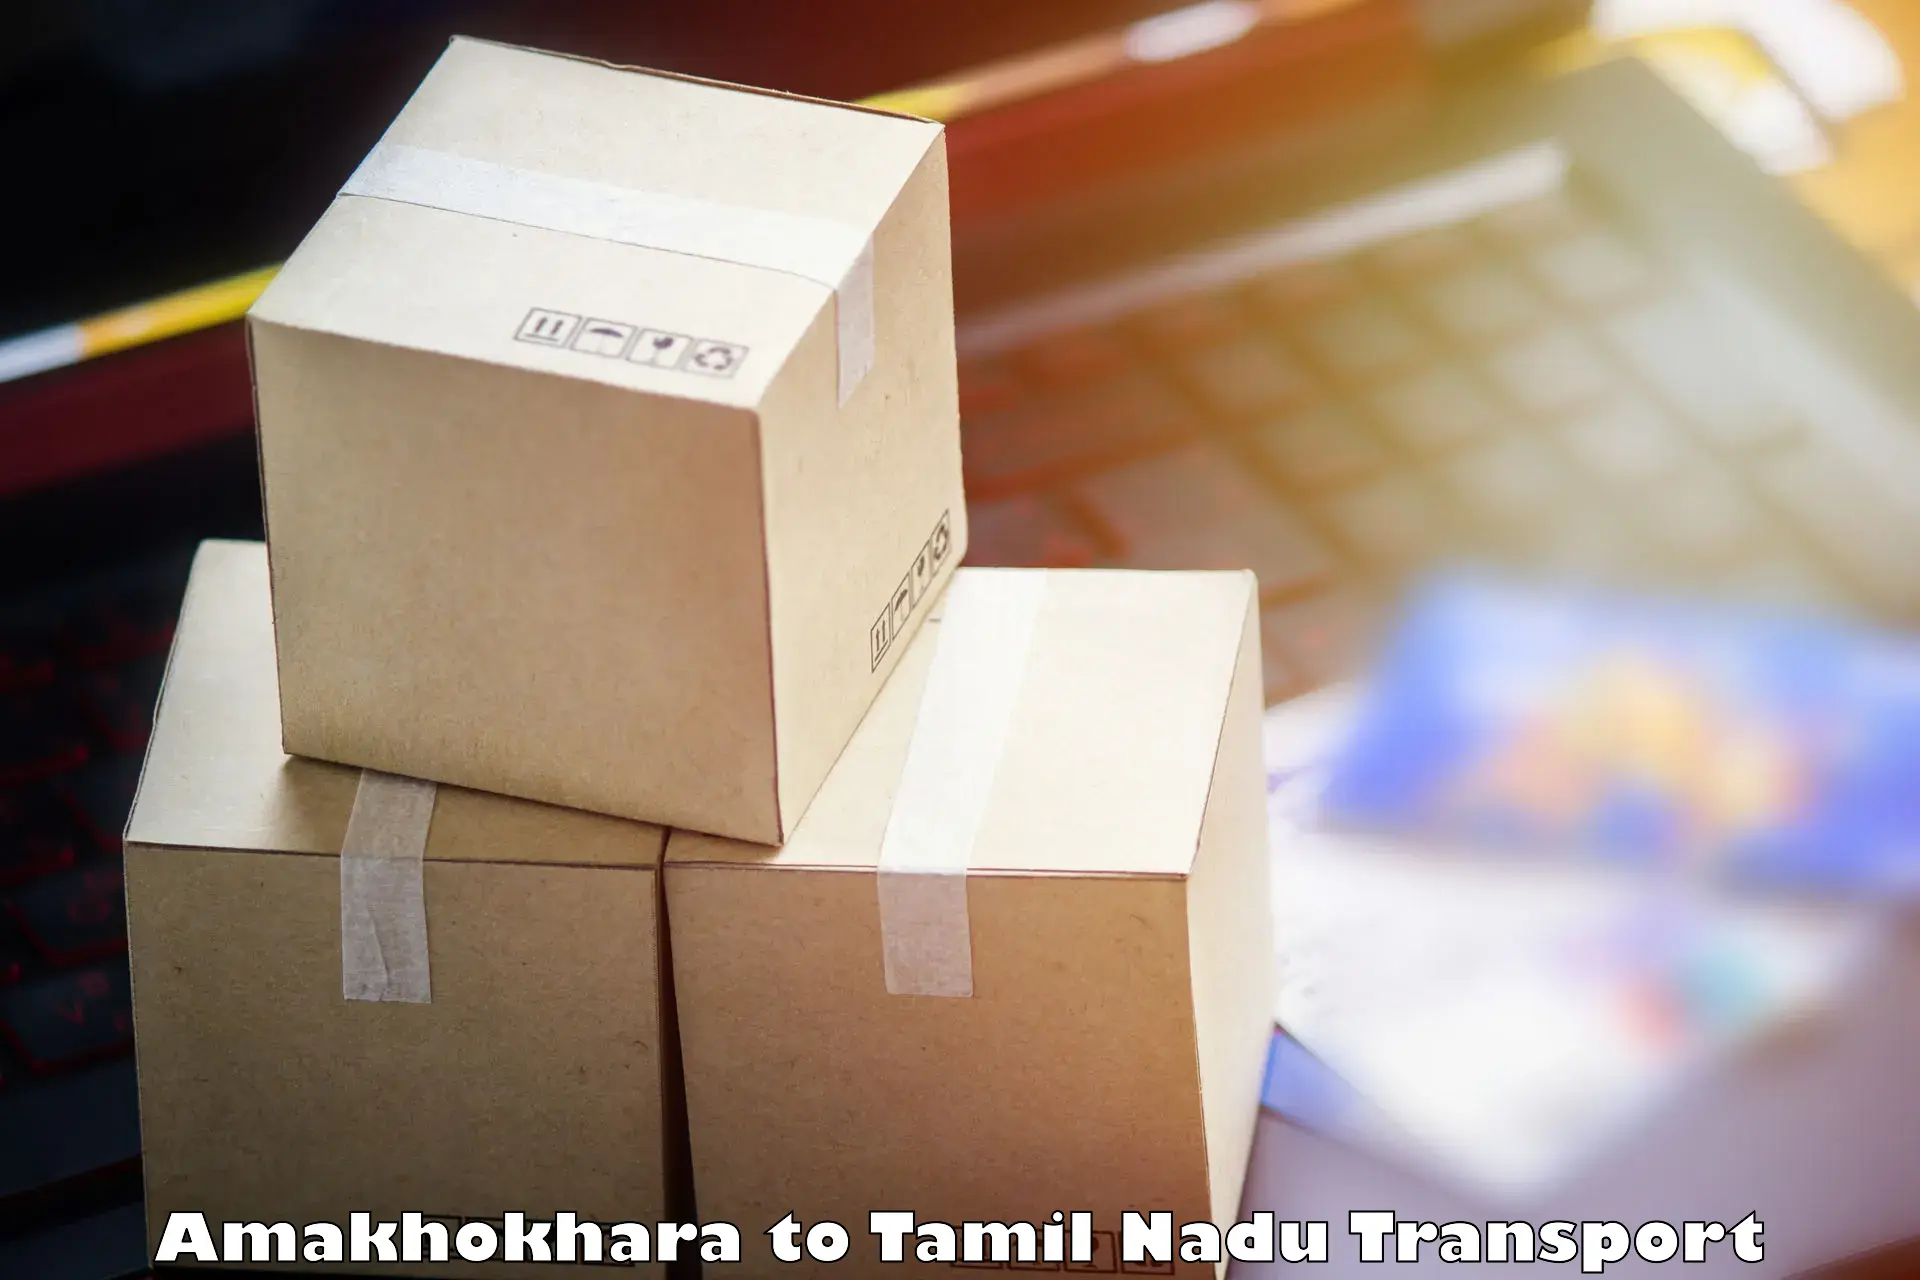 Intercity goods transport Amakhokhara to Meenakshi Academy of Higher Education and Research Chennai